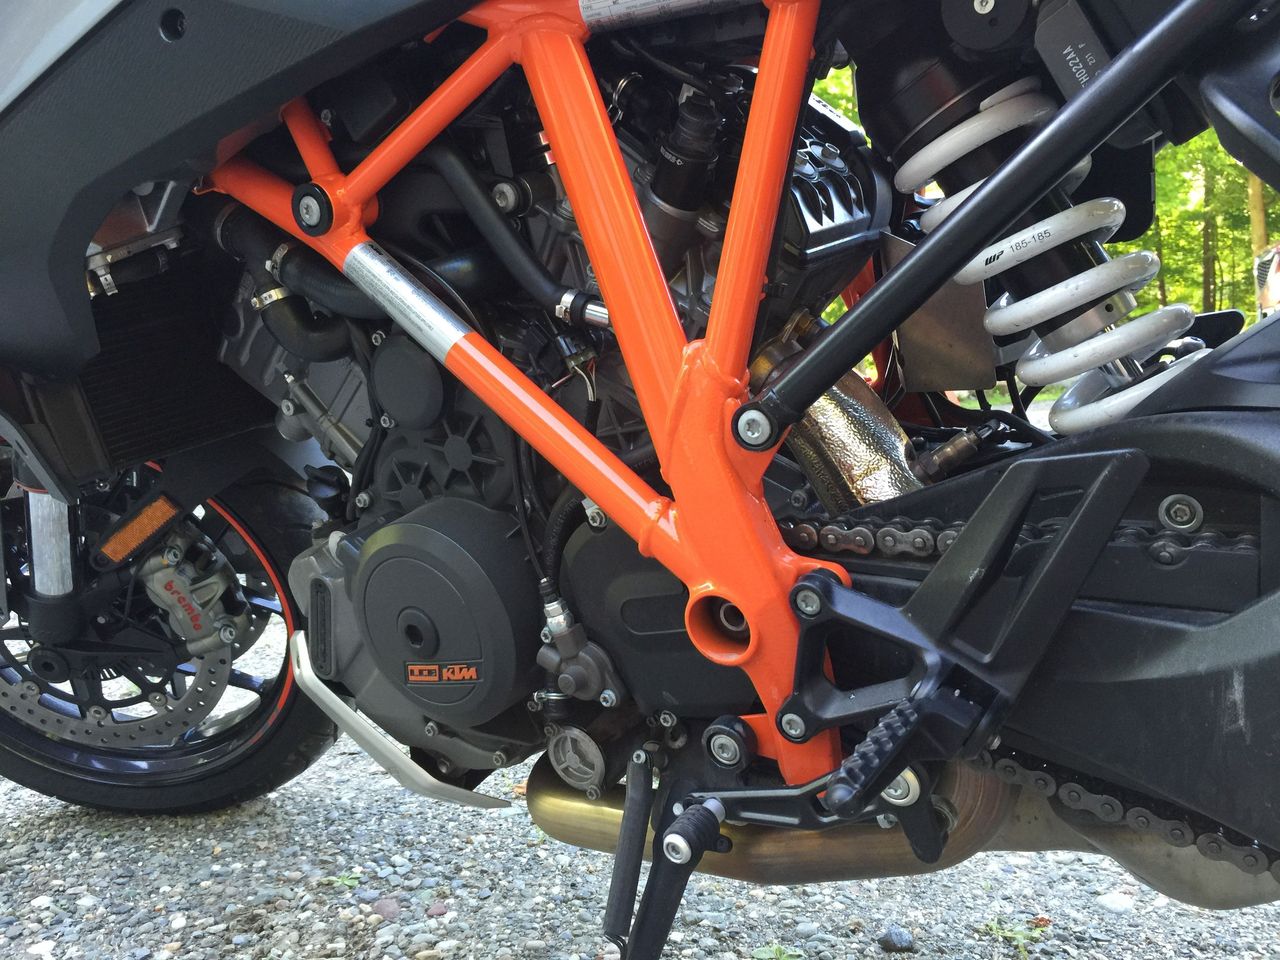 The Super Duke 1290 GT with a liquid-cooled V-twin engine and tubular steel frame